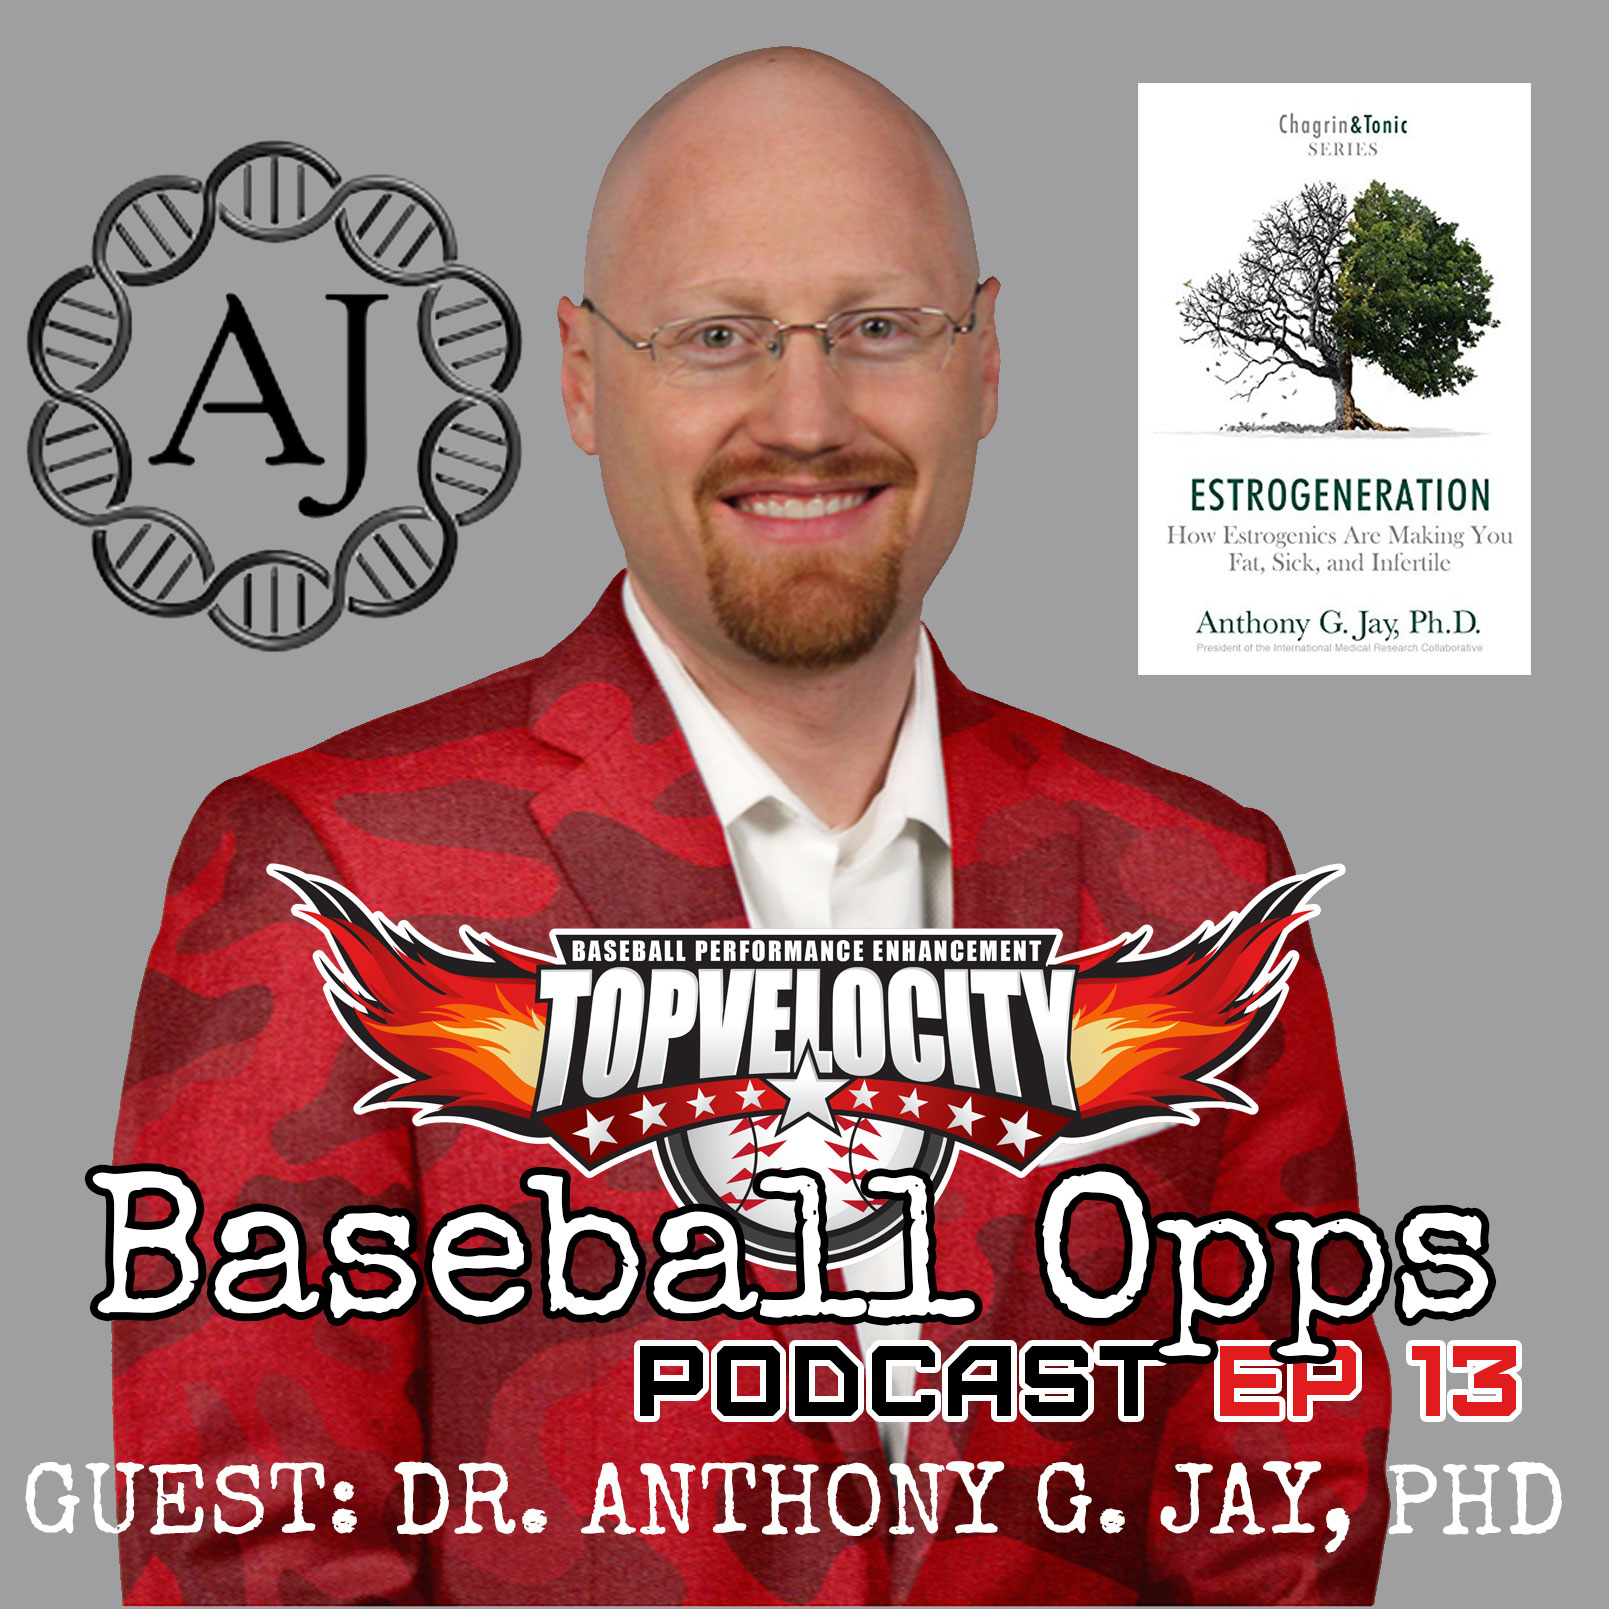 DNA Performance Enhancement with Dr. Jay on Baseball Opps with TopV